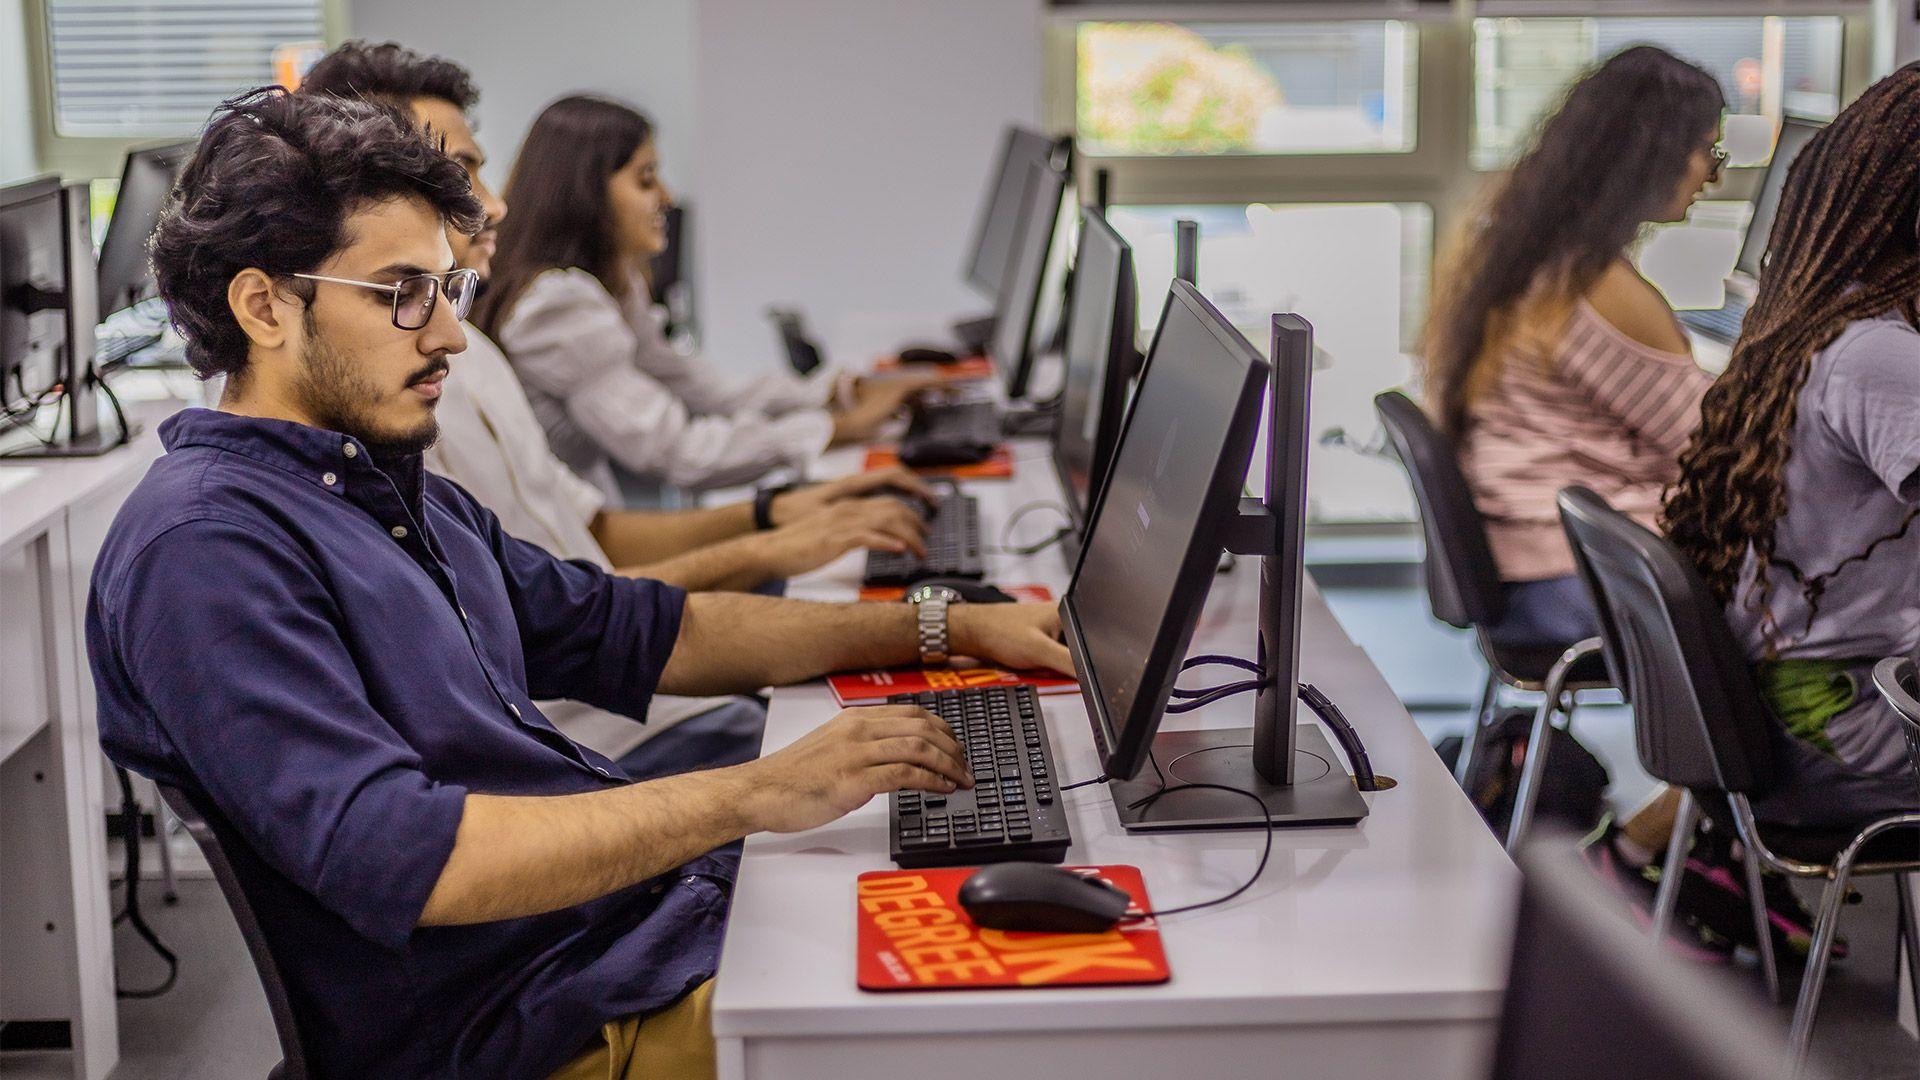 Set Yourself Apart with Middlesex University Dubai’s MSc in Data ScienceGain the cutting-edge analytical skills needed to thrive as a data scientist in a lucrative industry